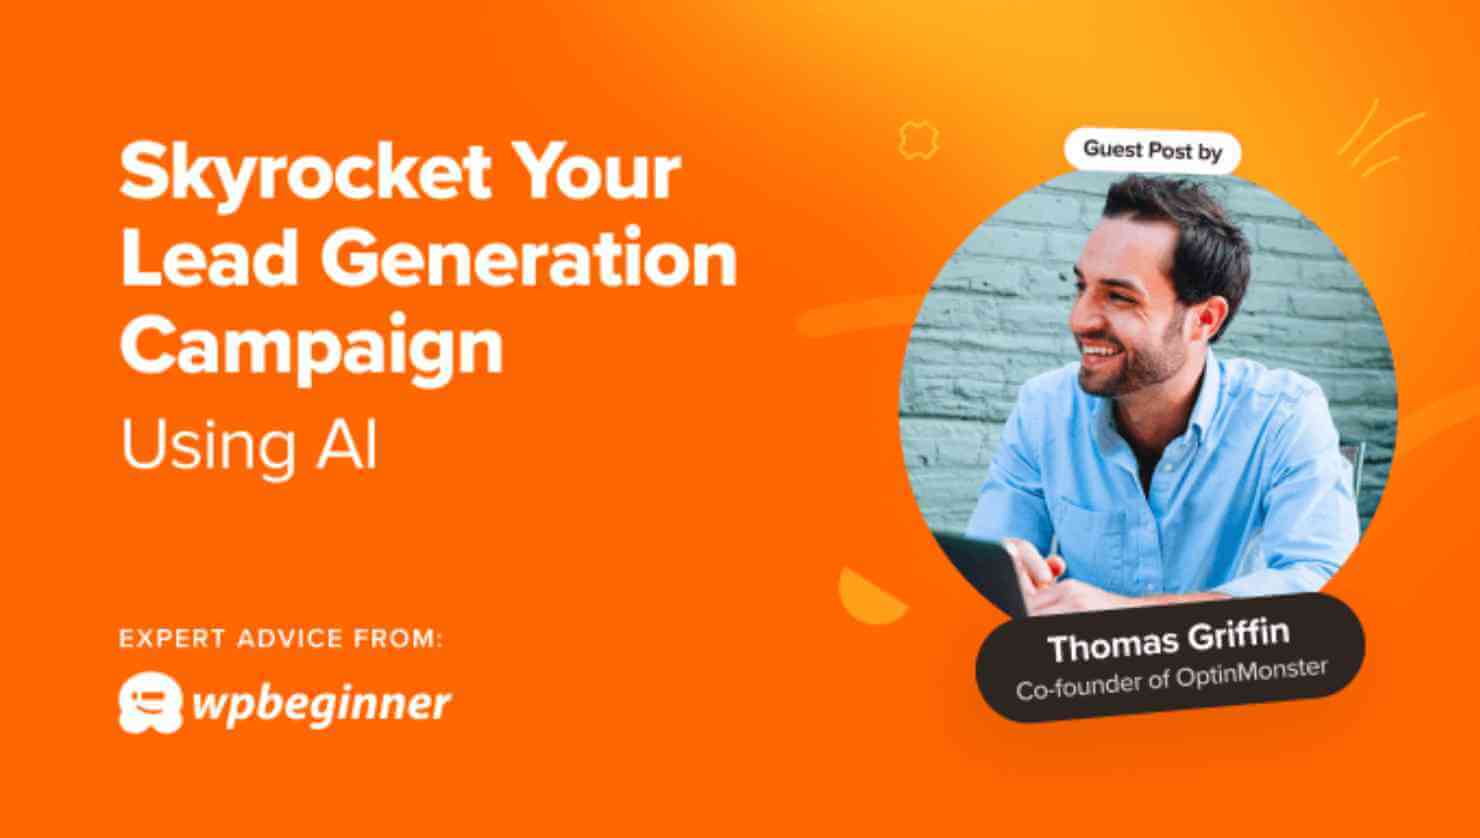 Bright Orange graphic with a photo of Thomas Griffin. It says "Skyrocket Your Lead Generation Campaign Using Al. Expert Advice From WPbeginner. Guest Post by Thomas Griffin, Co-Founder of OptinMonster"